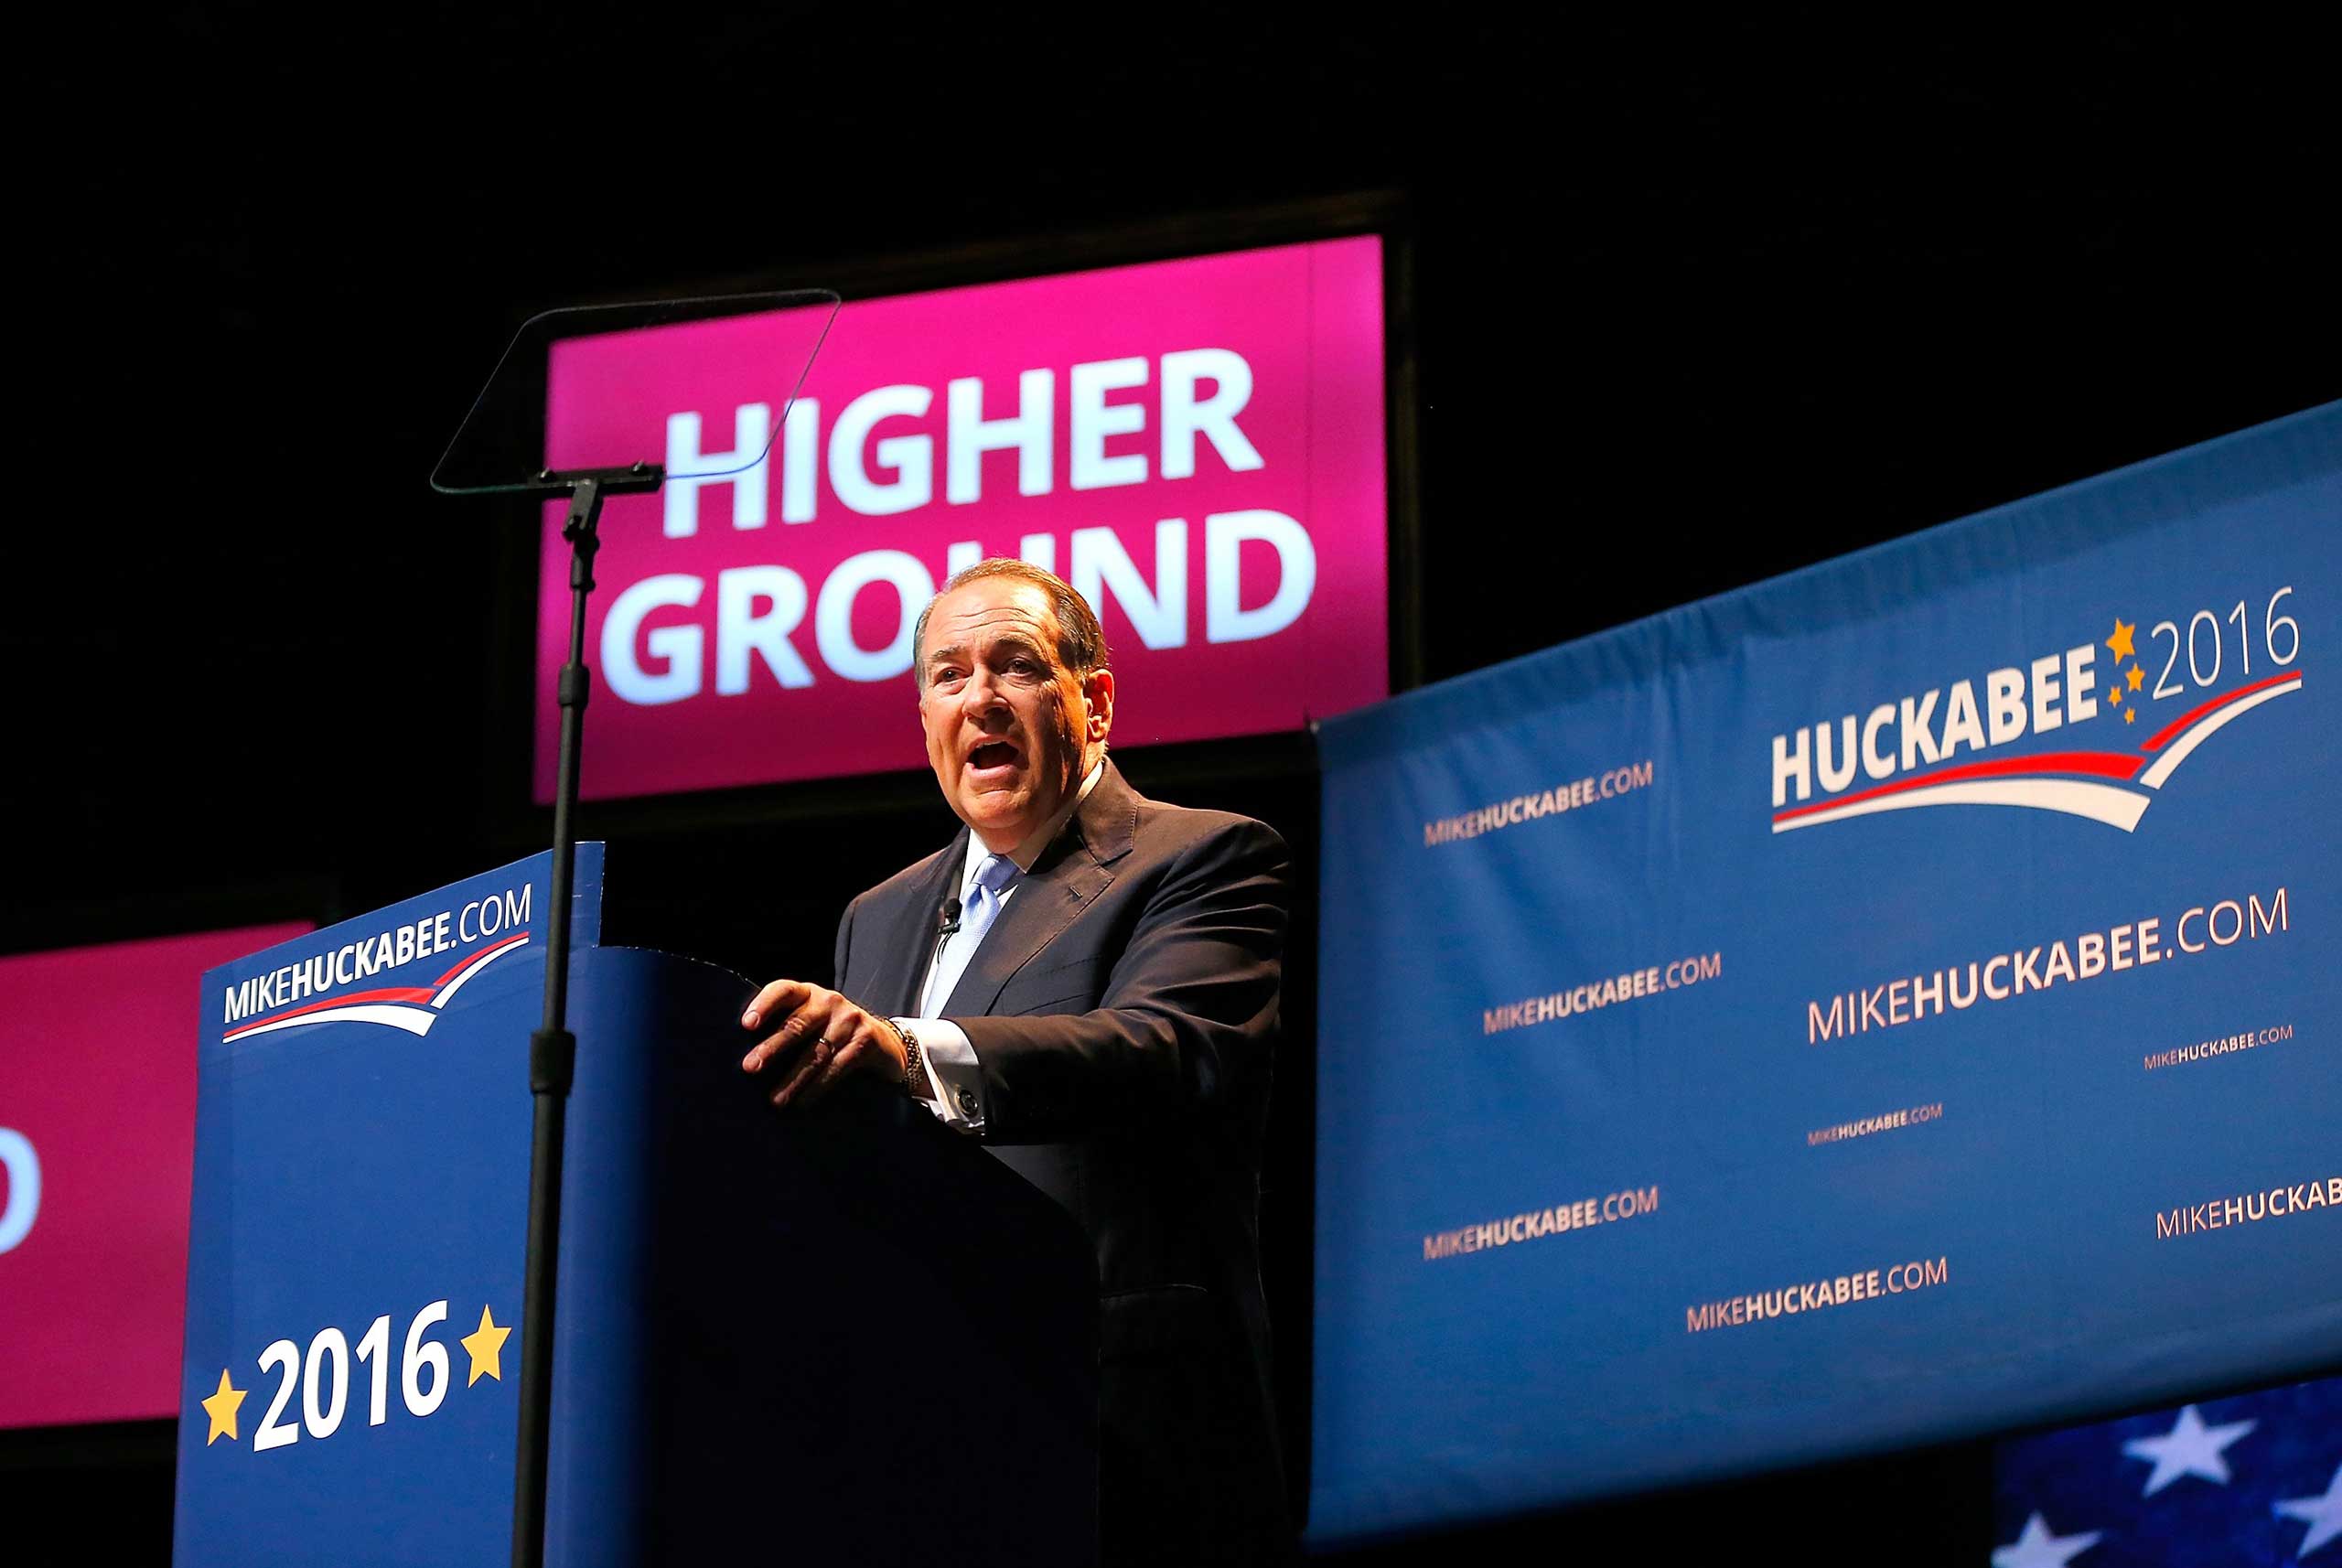 Former Arkansas Gov. Mike Huckabee speaks as he officially announces his candidacy for the 2016 Presidential race on May 5, 2015 in Hope, Ark. (Matt Sullivan—Getty Images)